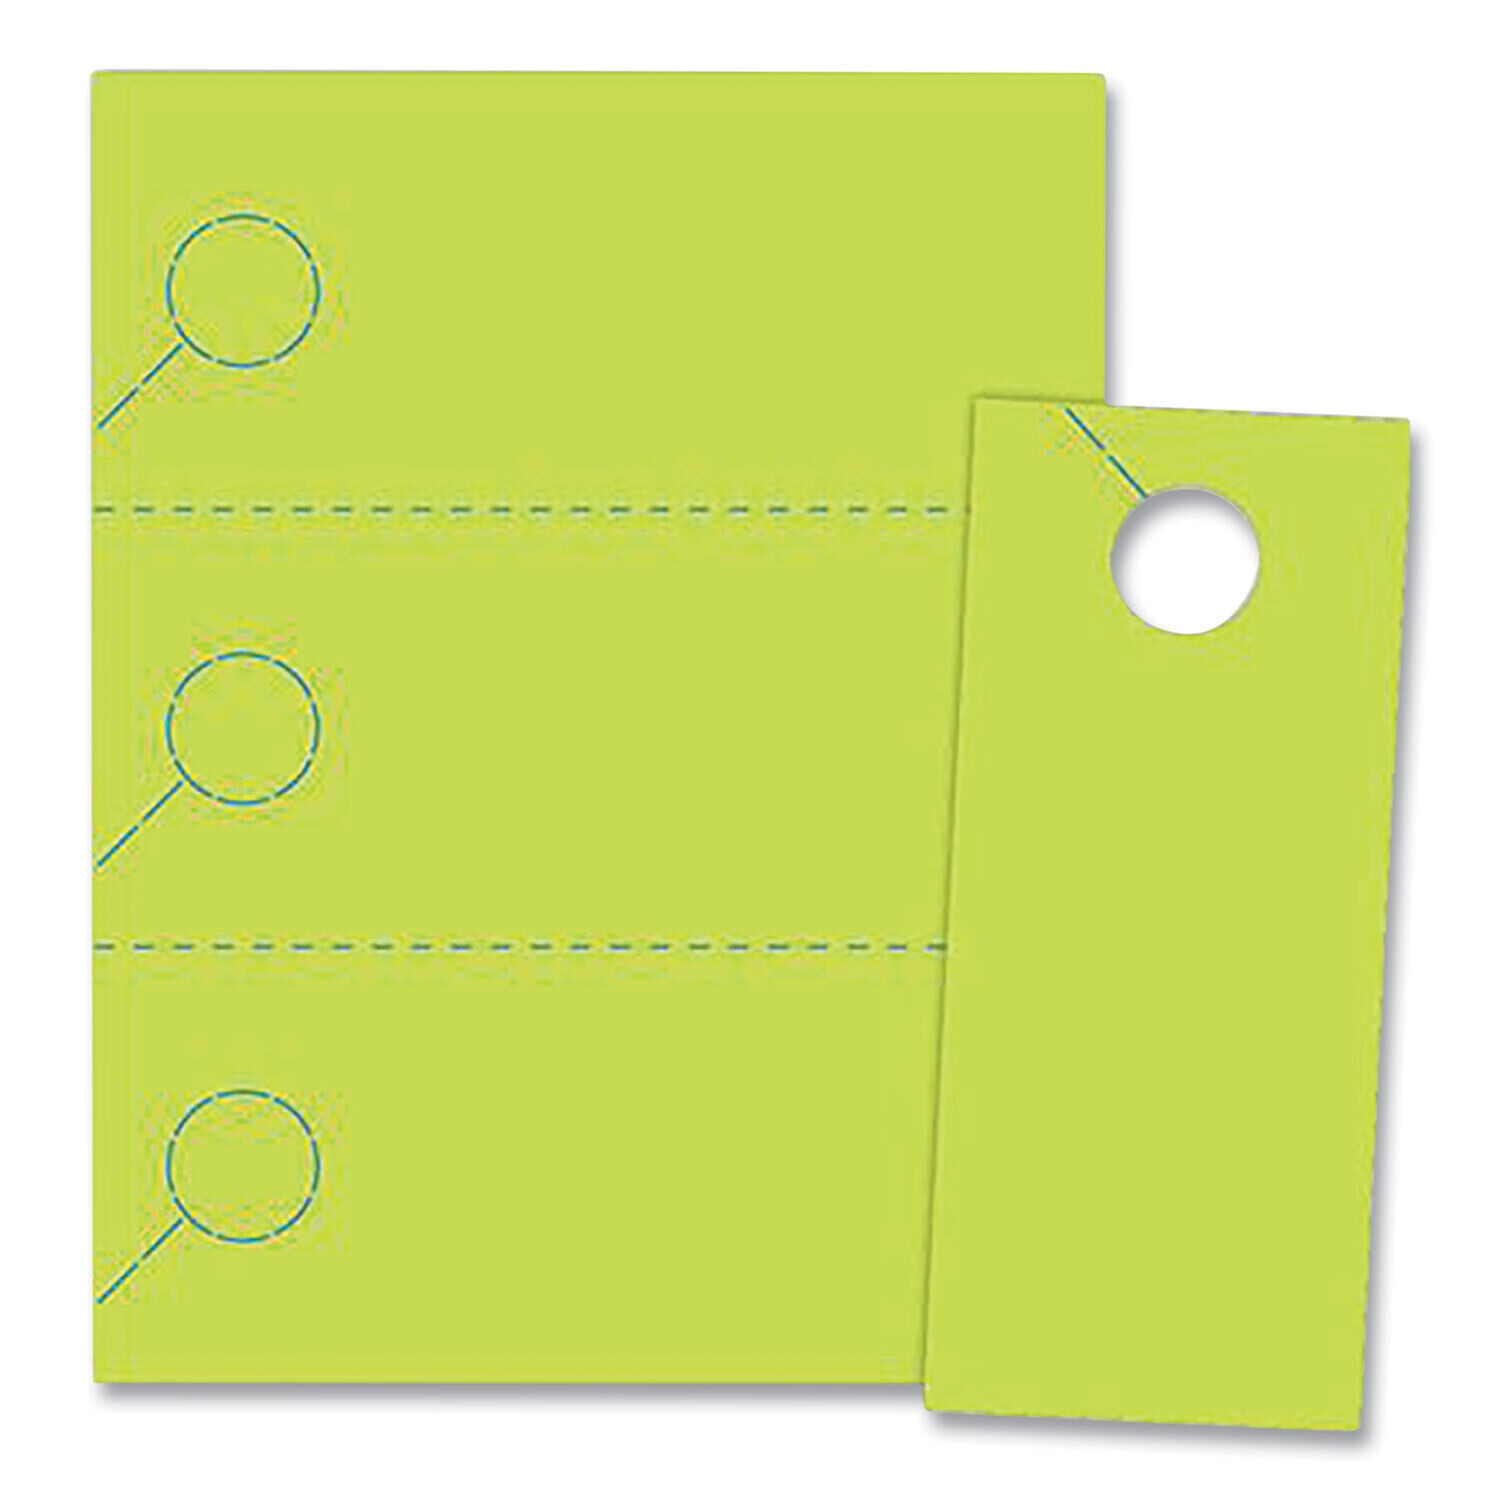 Blanks/usa Micro-perforated Door Hangers 8.5 X 11 Green 334 Sheets/pk Ldh310t6sg